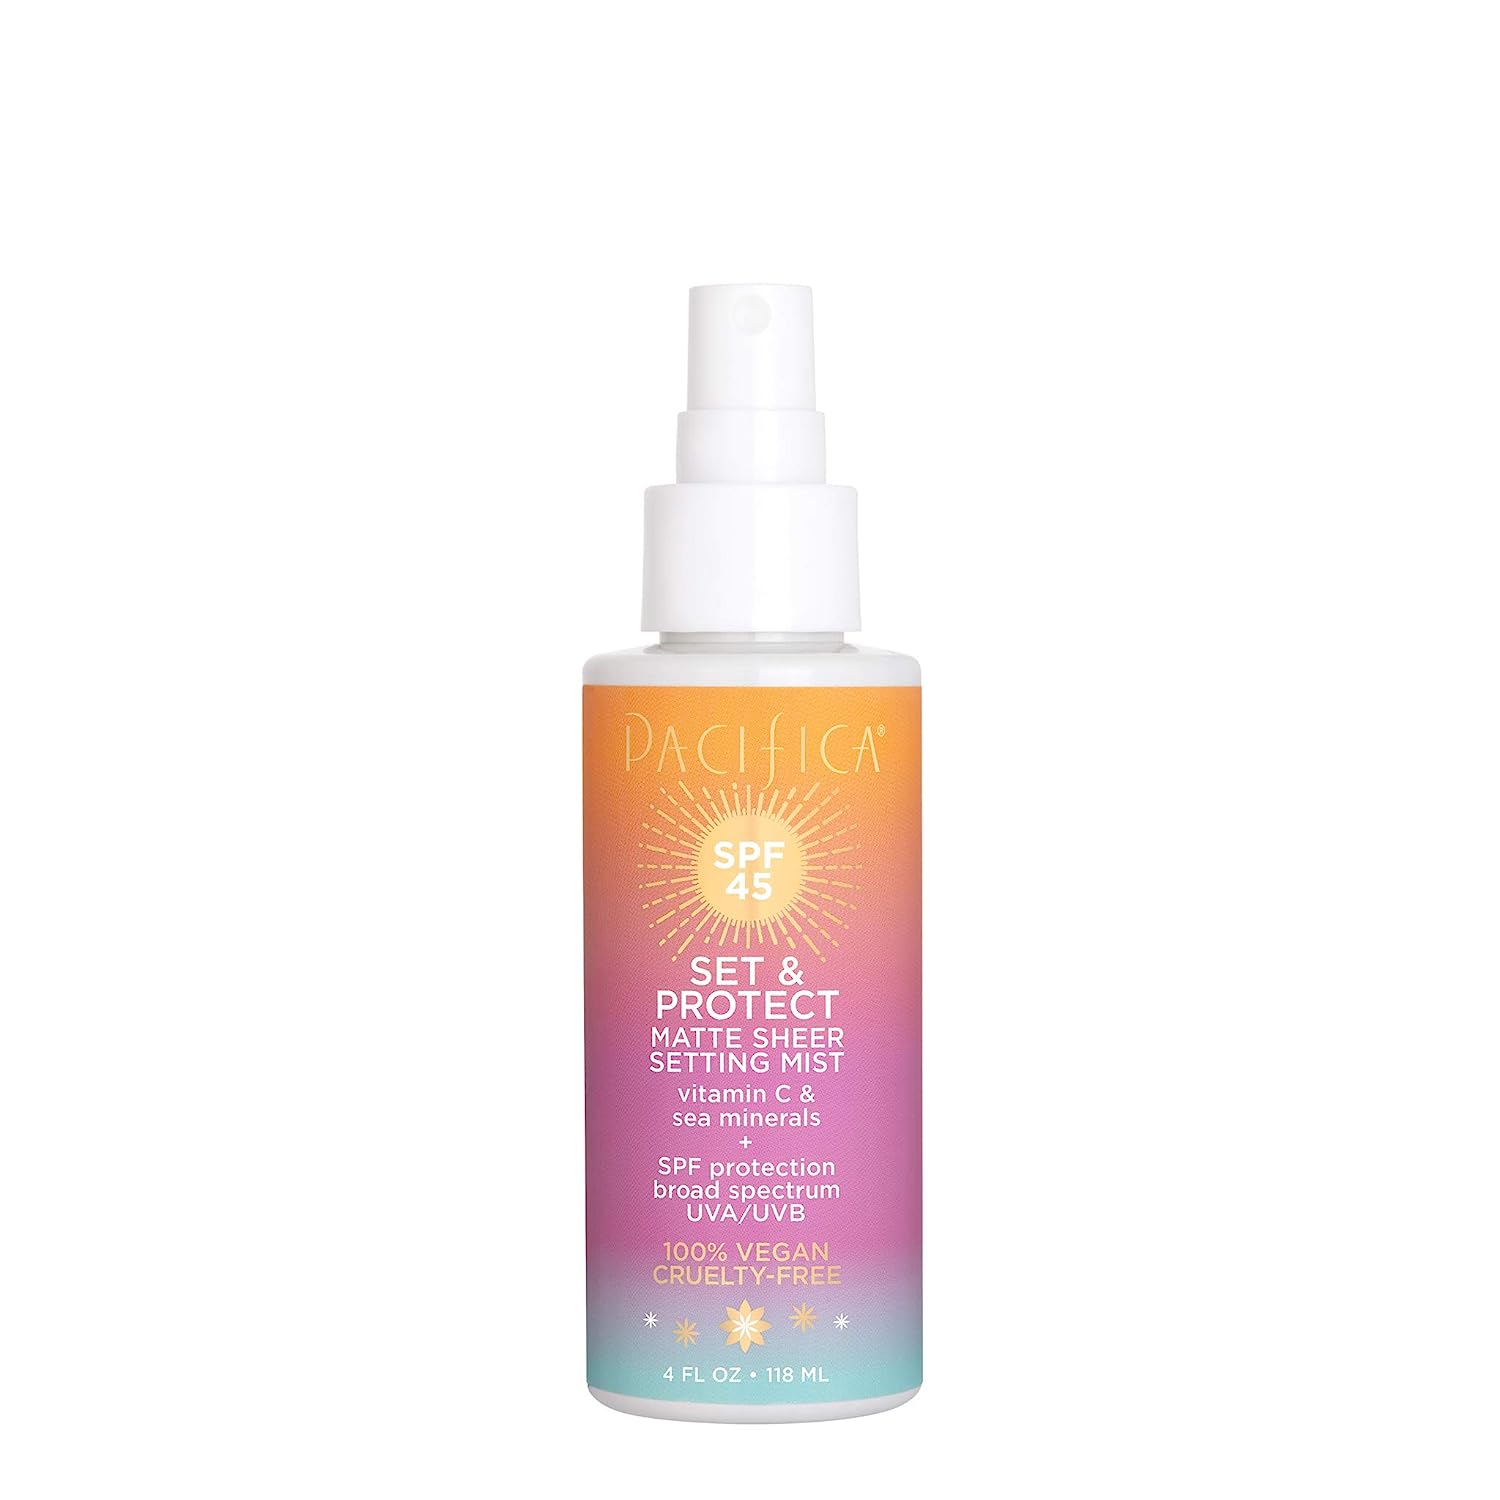 spf spray for face review